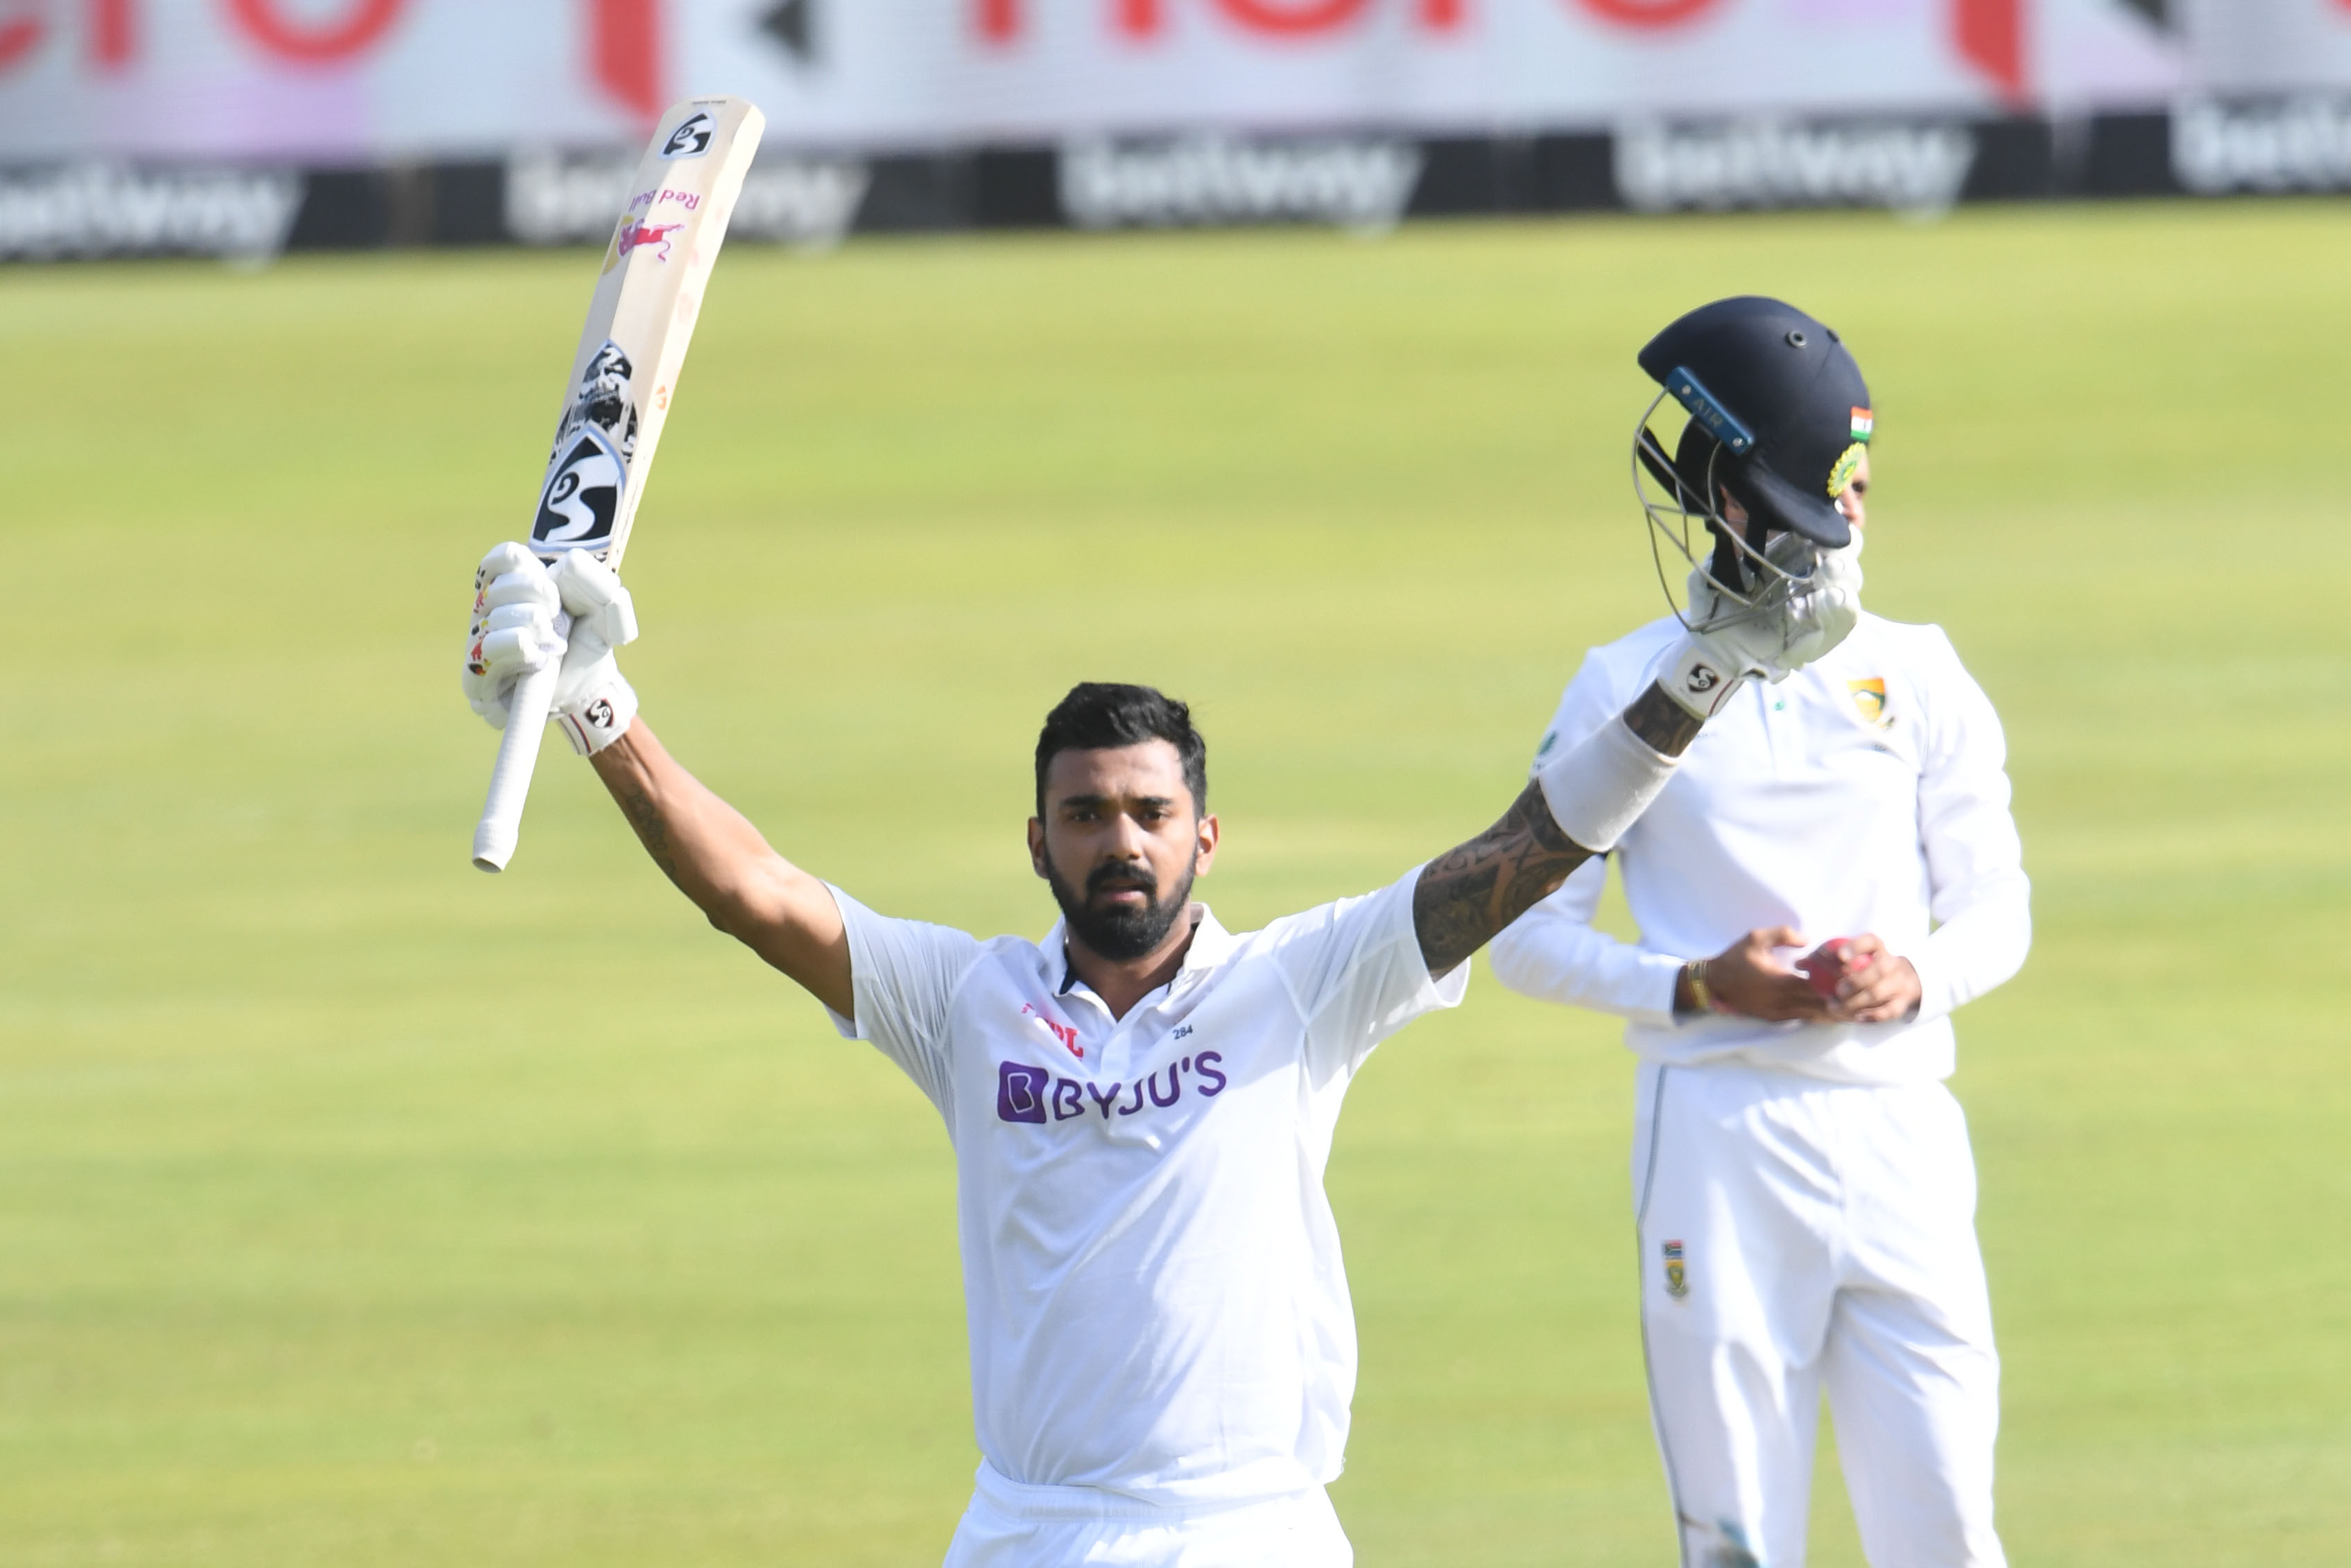 Day 1: K L Rahul strikes unbeaten ton, India 272/3 at stumps against South Africa